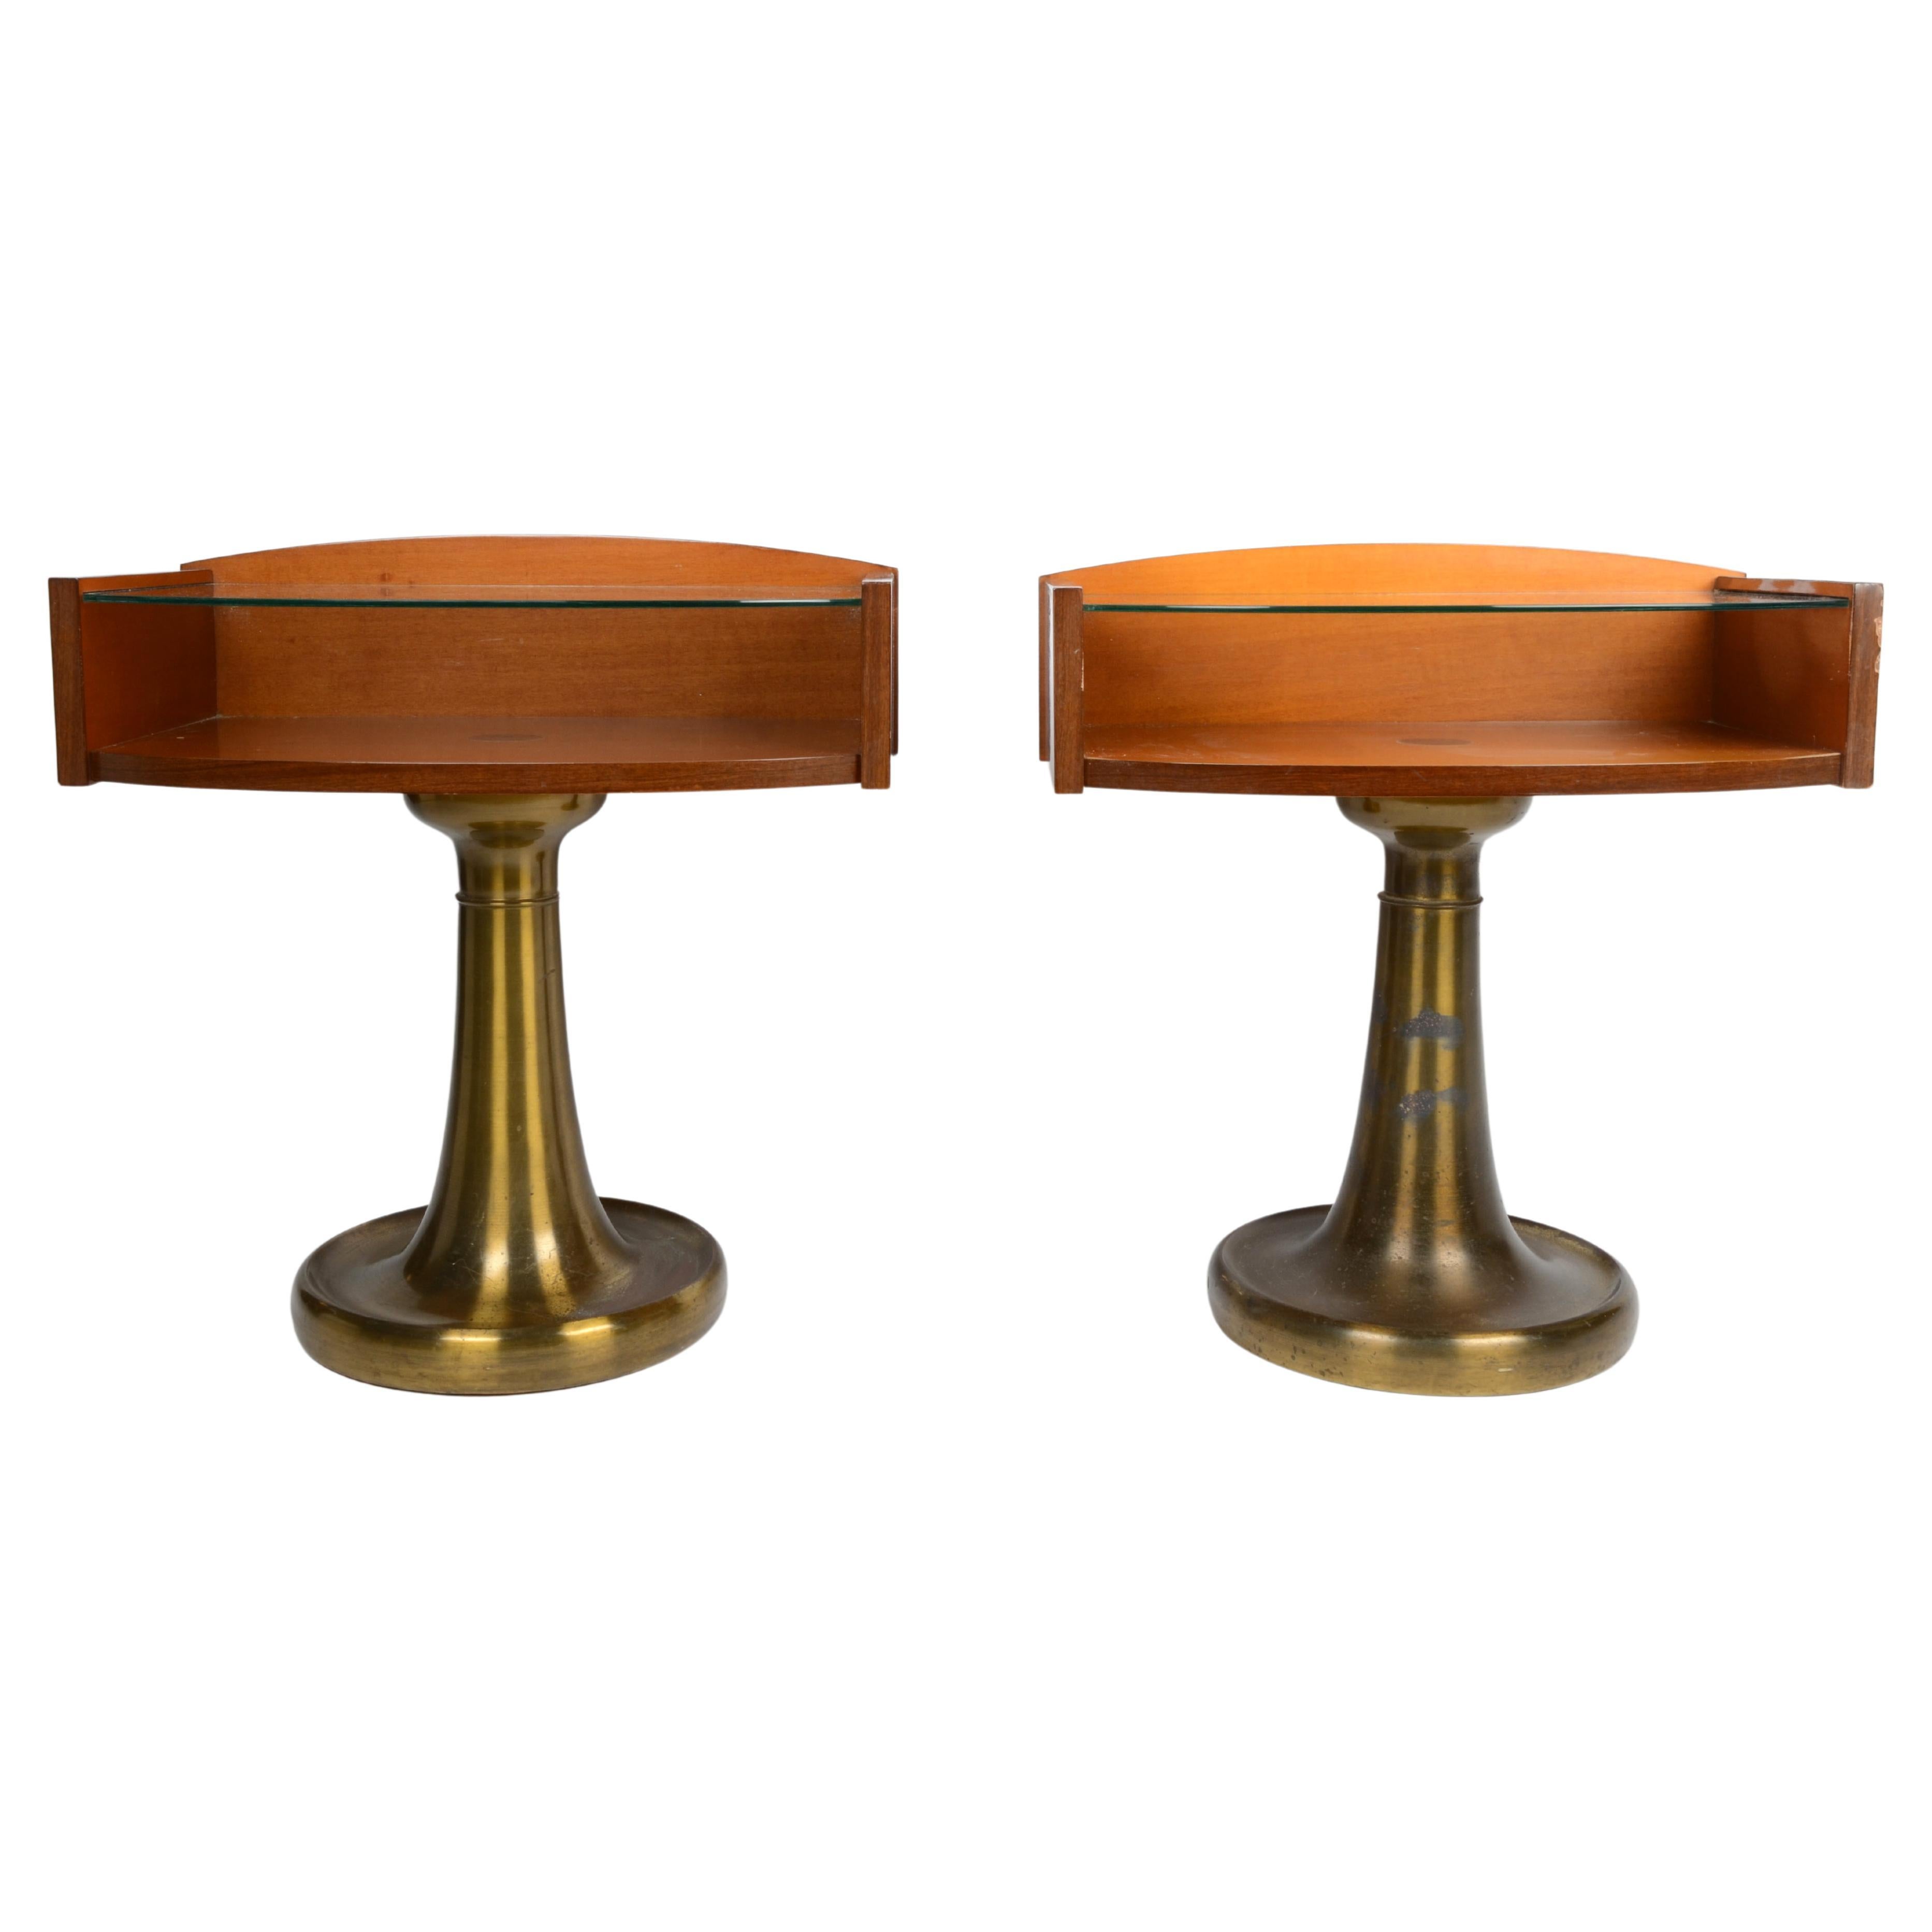 Pair of Bedside Tables, Wood and Brass, by Ronchetti & Porri, Italy